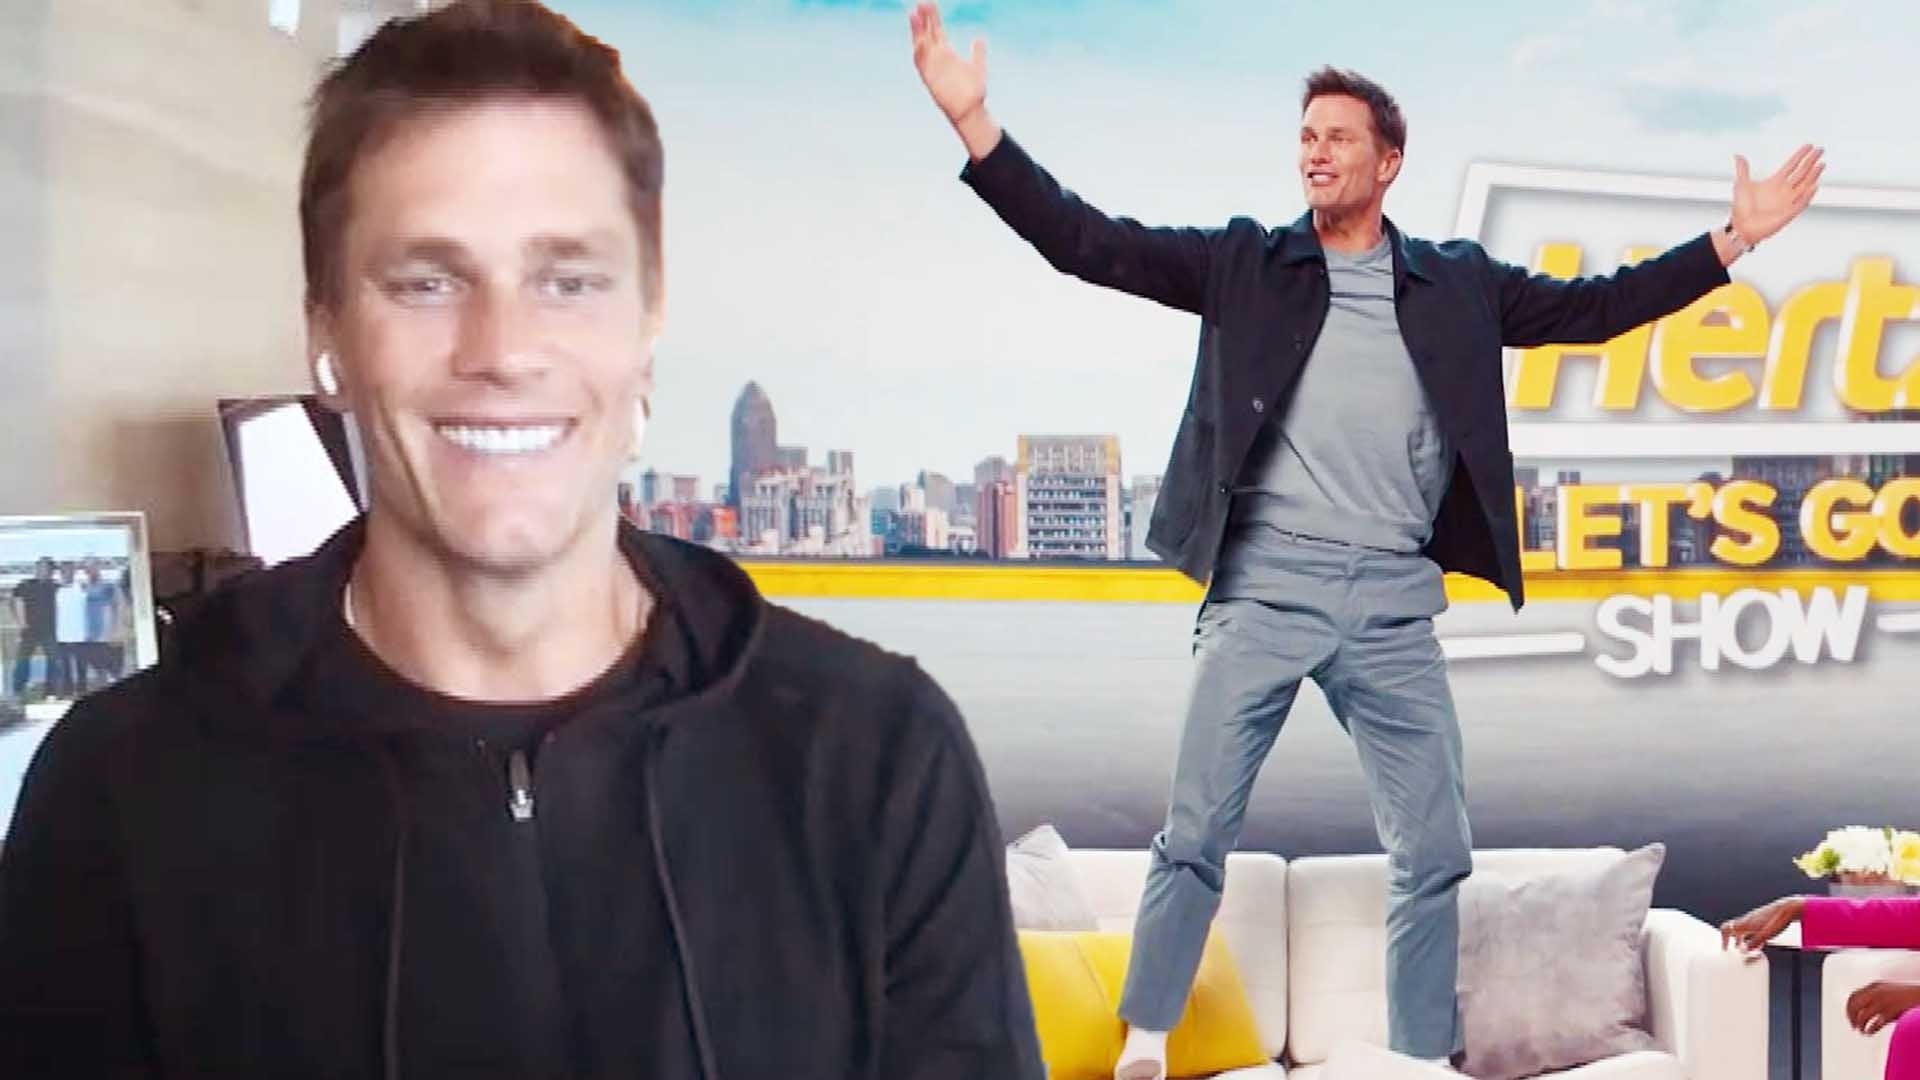 Tom Brady Pokes Fun at Infamous Tom Cruise Moment With Oprah Winfrey (Exclusive)